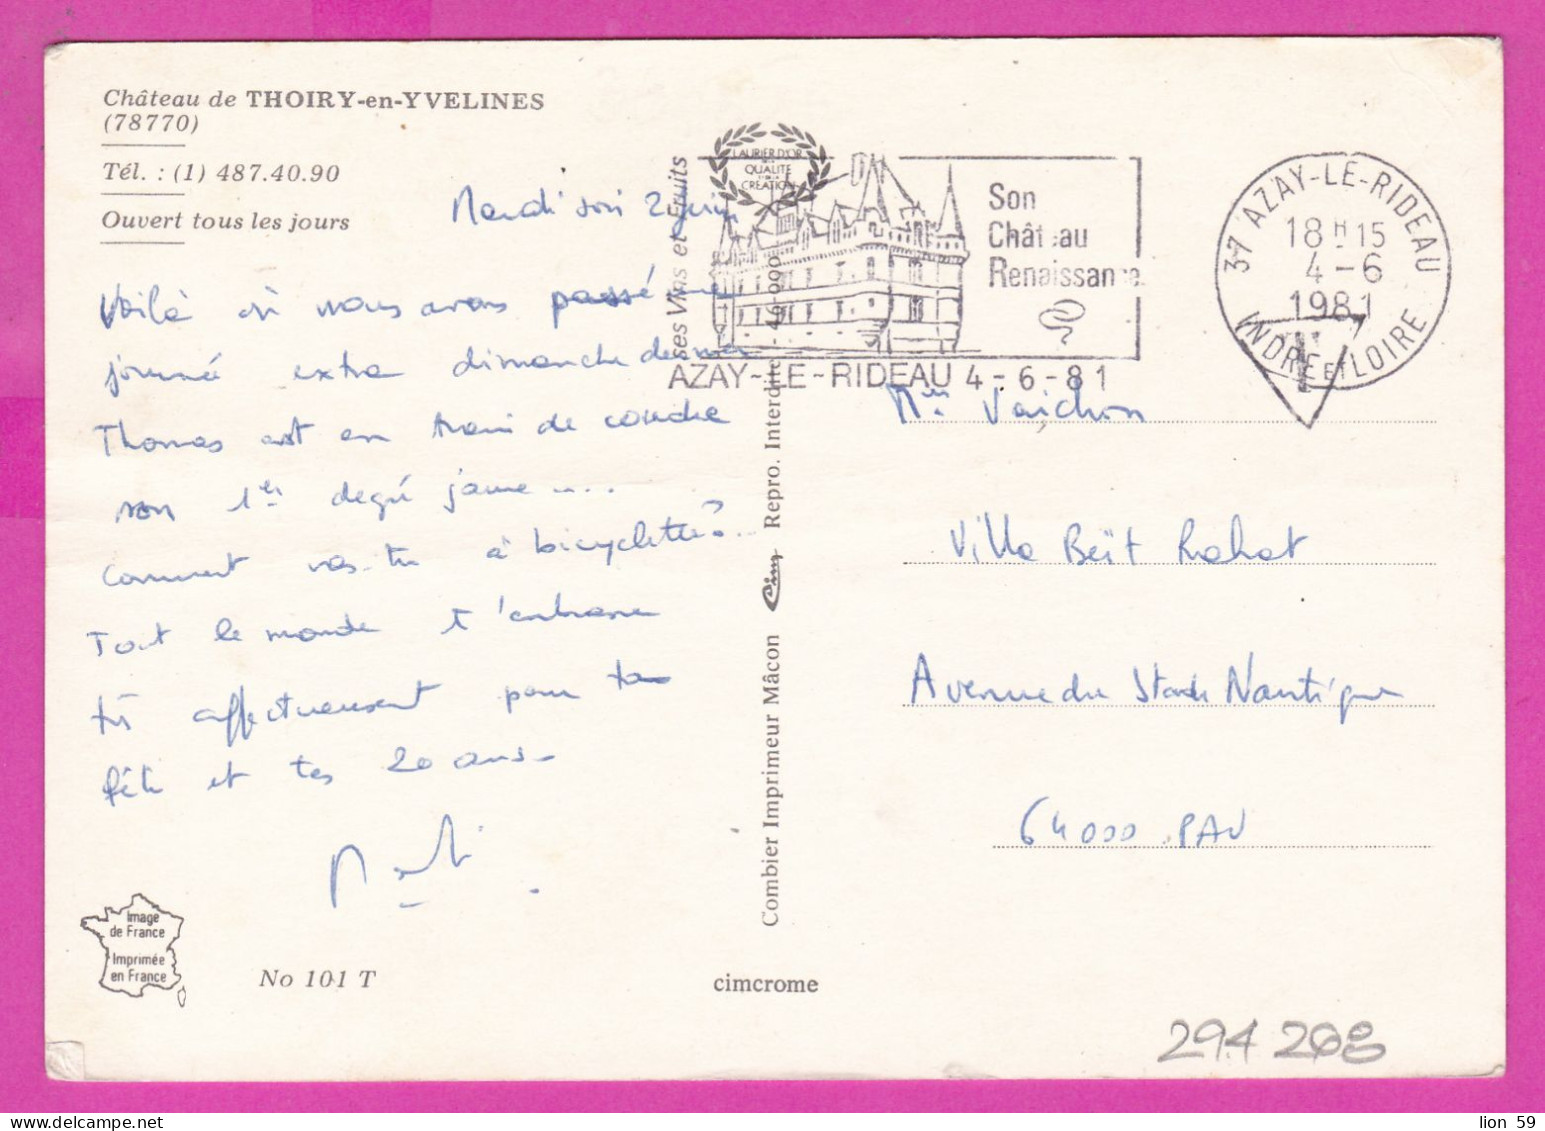 294268 / France - LES PARCS DE THOIRY - Peaugres Sigean Thoiry PC 1981 Postage DUE Azay-le Rideau USED Flamme - Covers & Documents